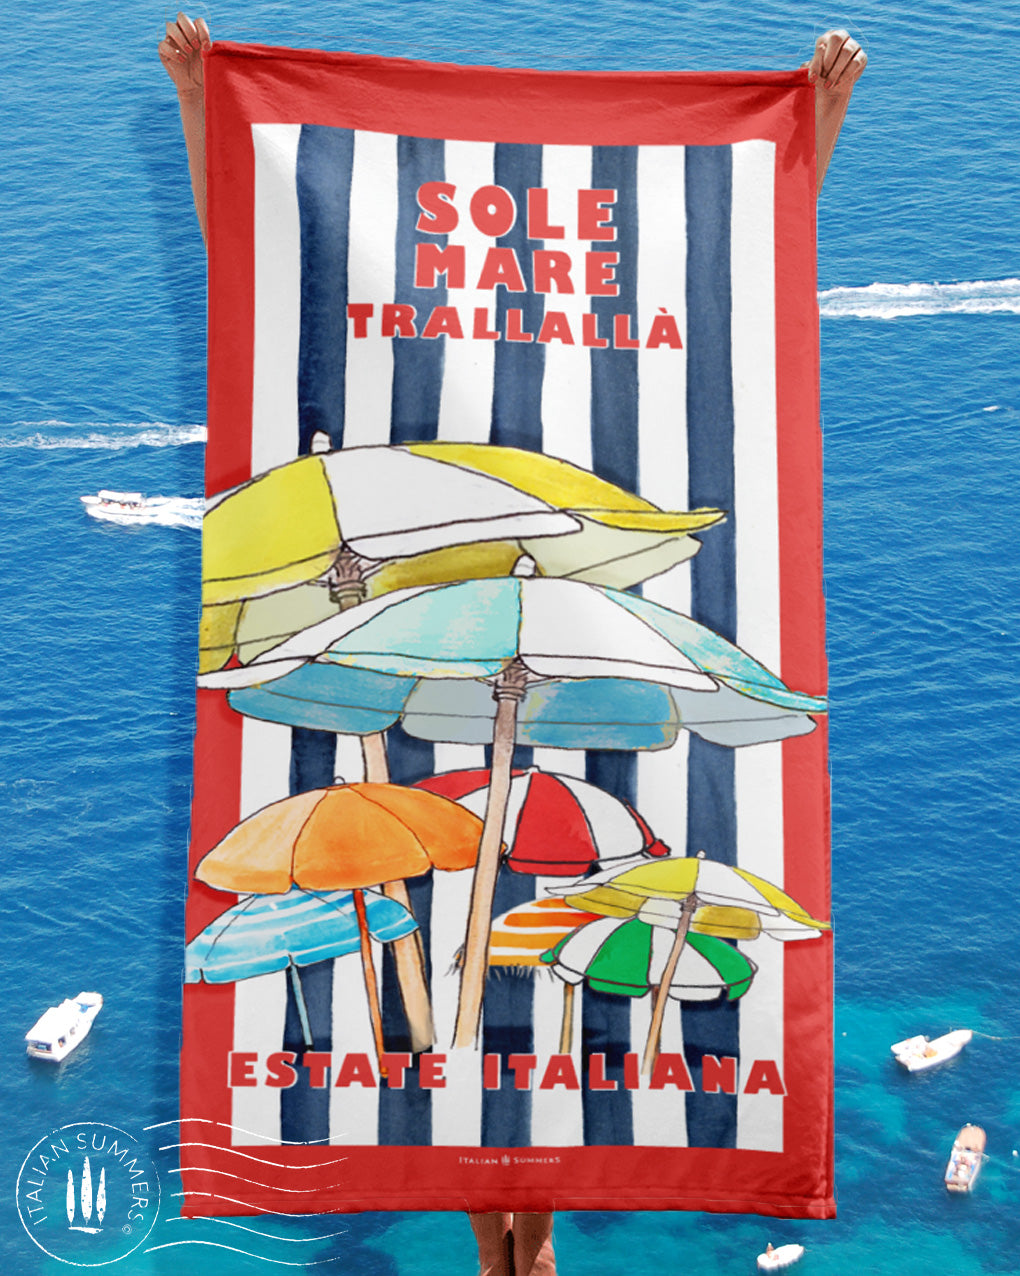 retro flavored Italy beach towel printed with a blue stripe pattern with a red frame, colorful beach umbrellas and the phrase: Sole mare trallalla', Sun, Sea and la-di-dah. Made by Italian Summers